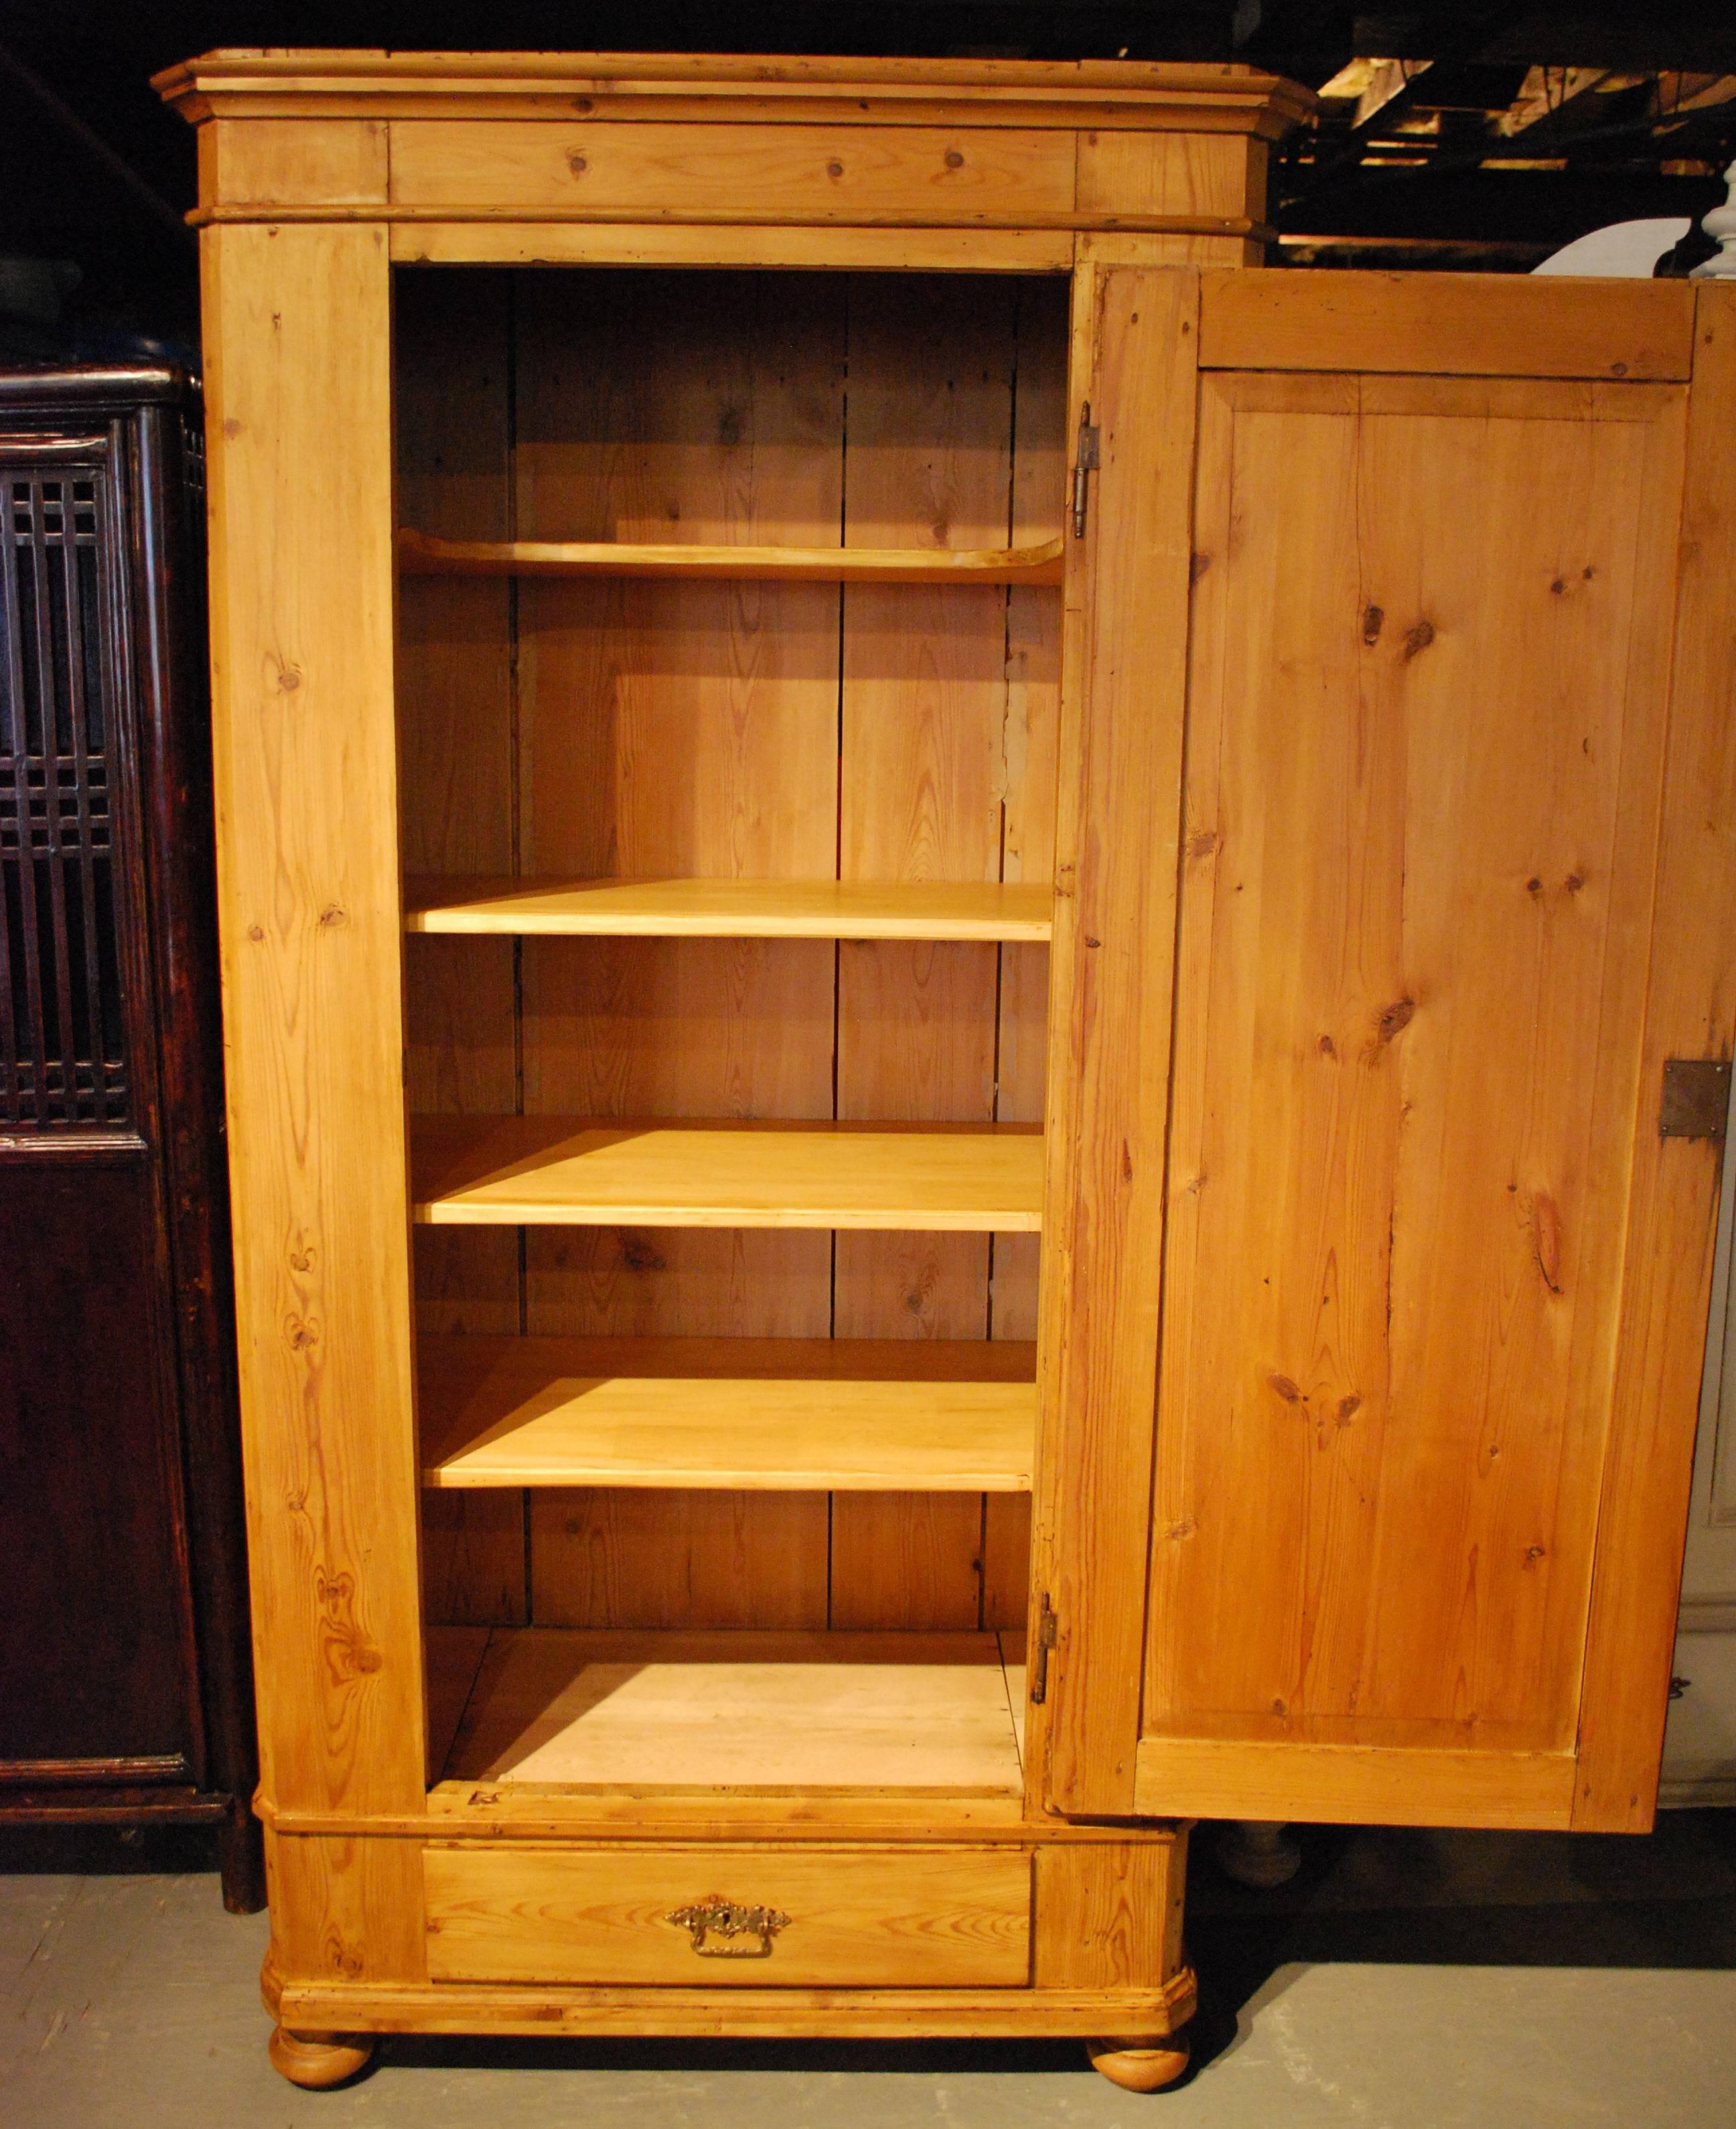 An antique Danish pine armoire displaying a nicely molded top, canted edges and an arched top recessed panel door that opens to a shelved interior with two secret compartments. The armoire shows a dovetailed base drawer, bun and block feet, and a